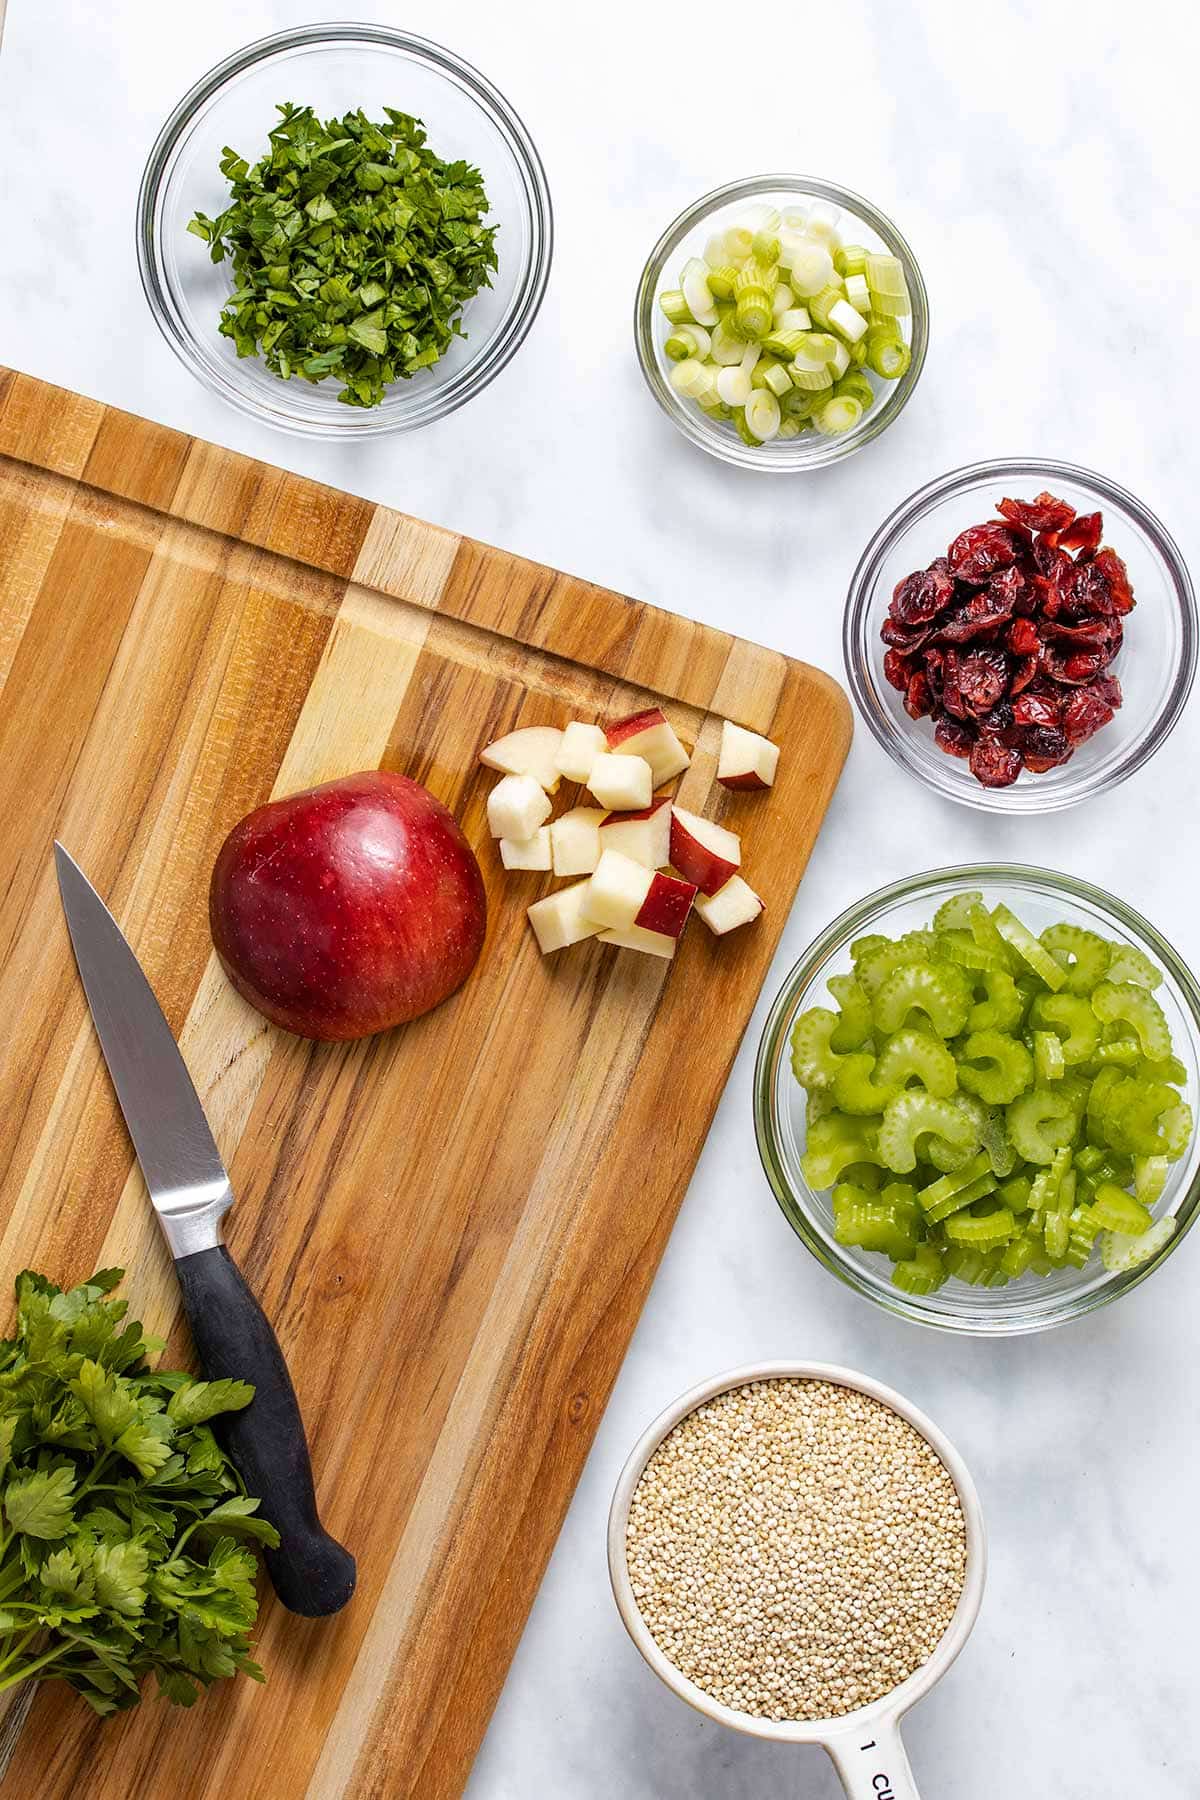 diced apple on a wooden cutting board with a knife, next to small bowls of uncooked quinoa, diced celery, dried cranberries, sliced green onion and chopped parsley